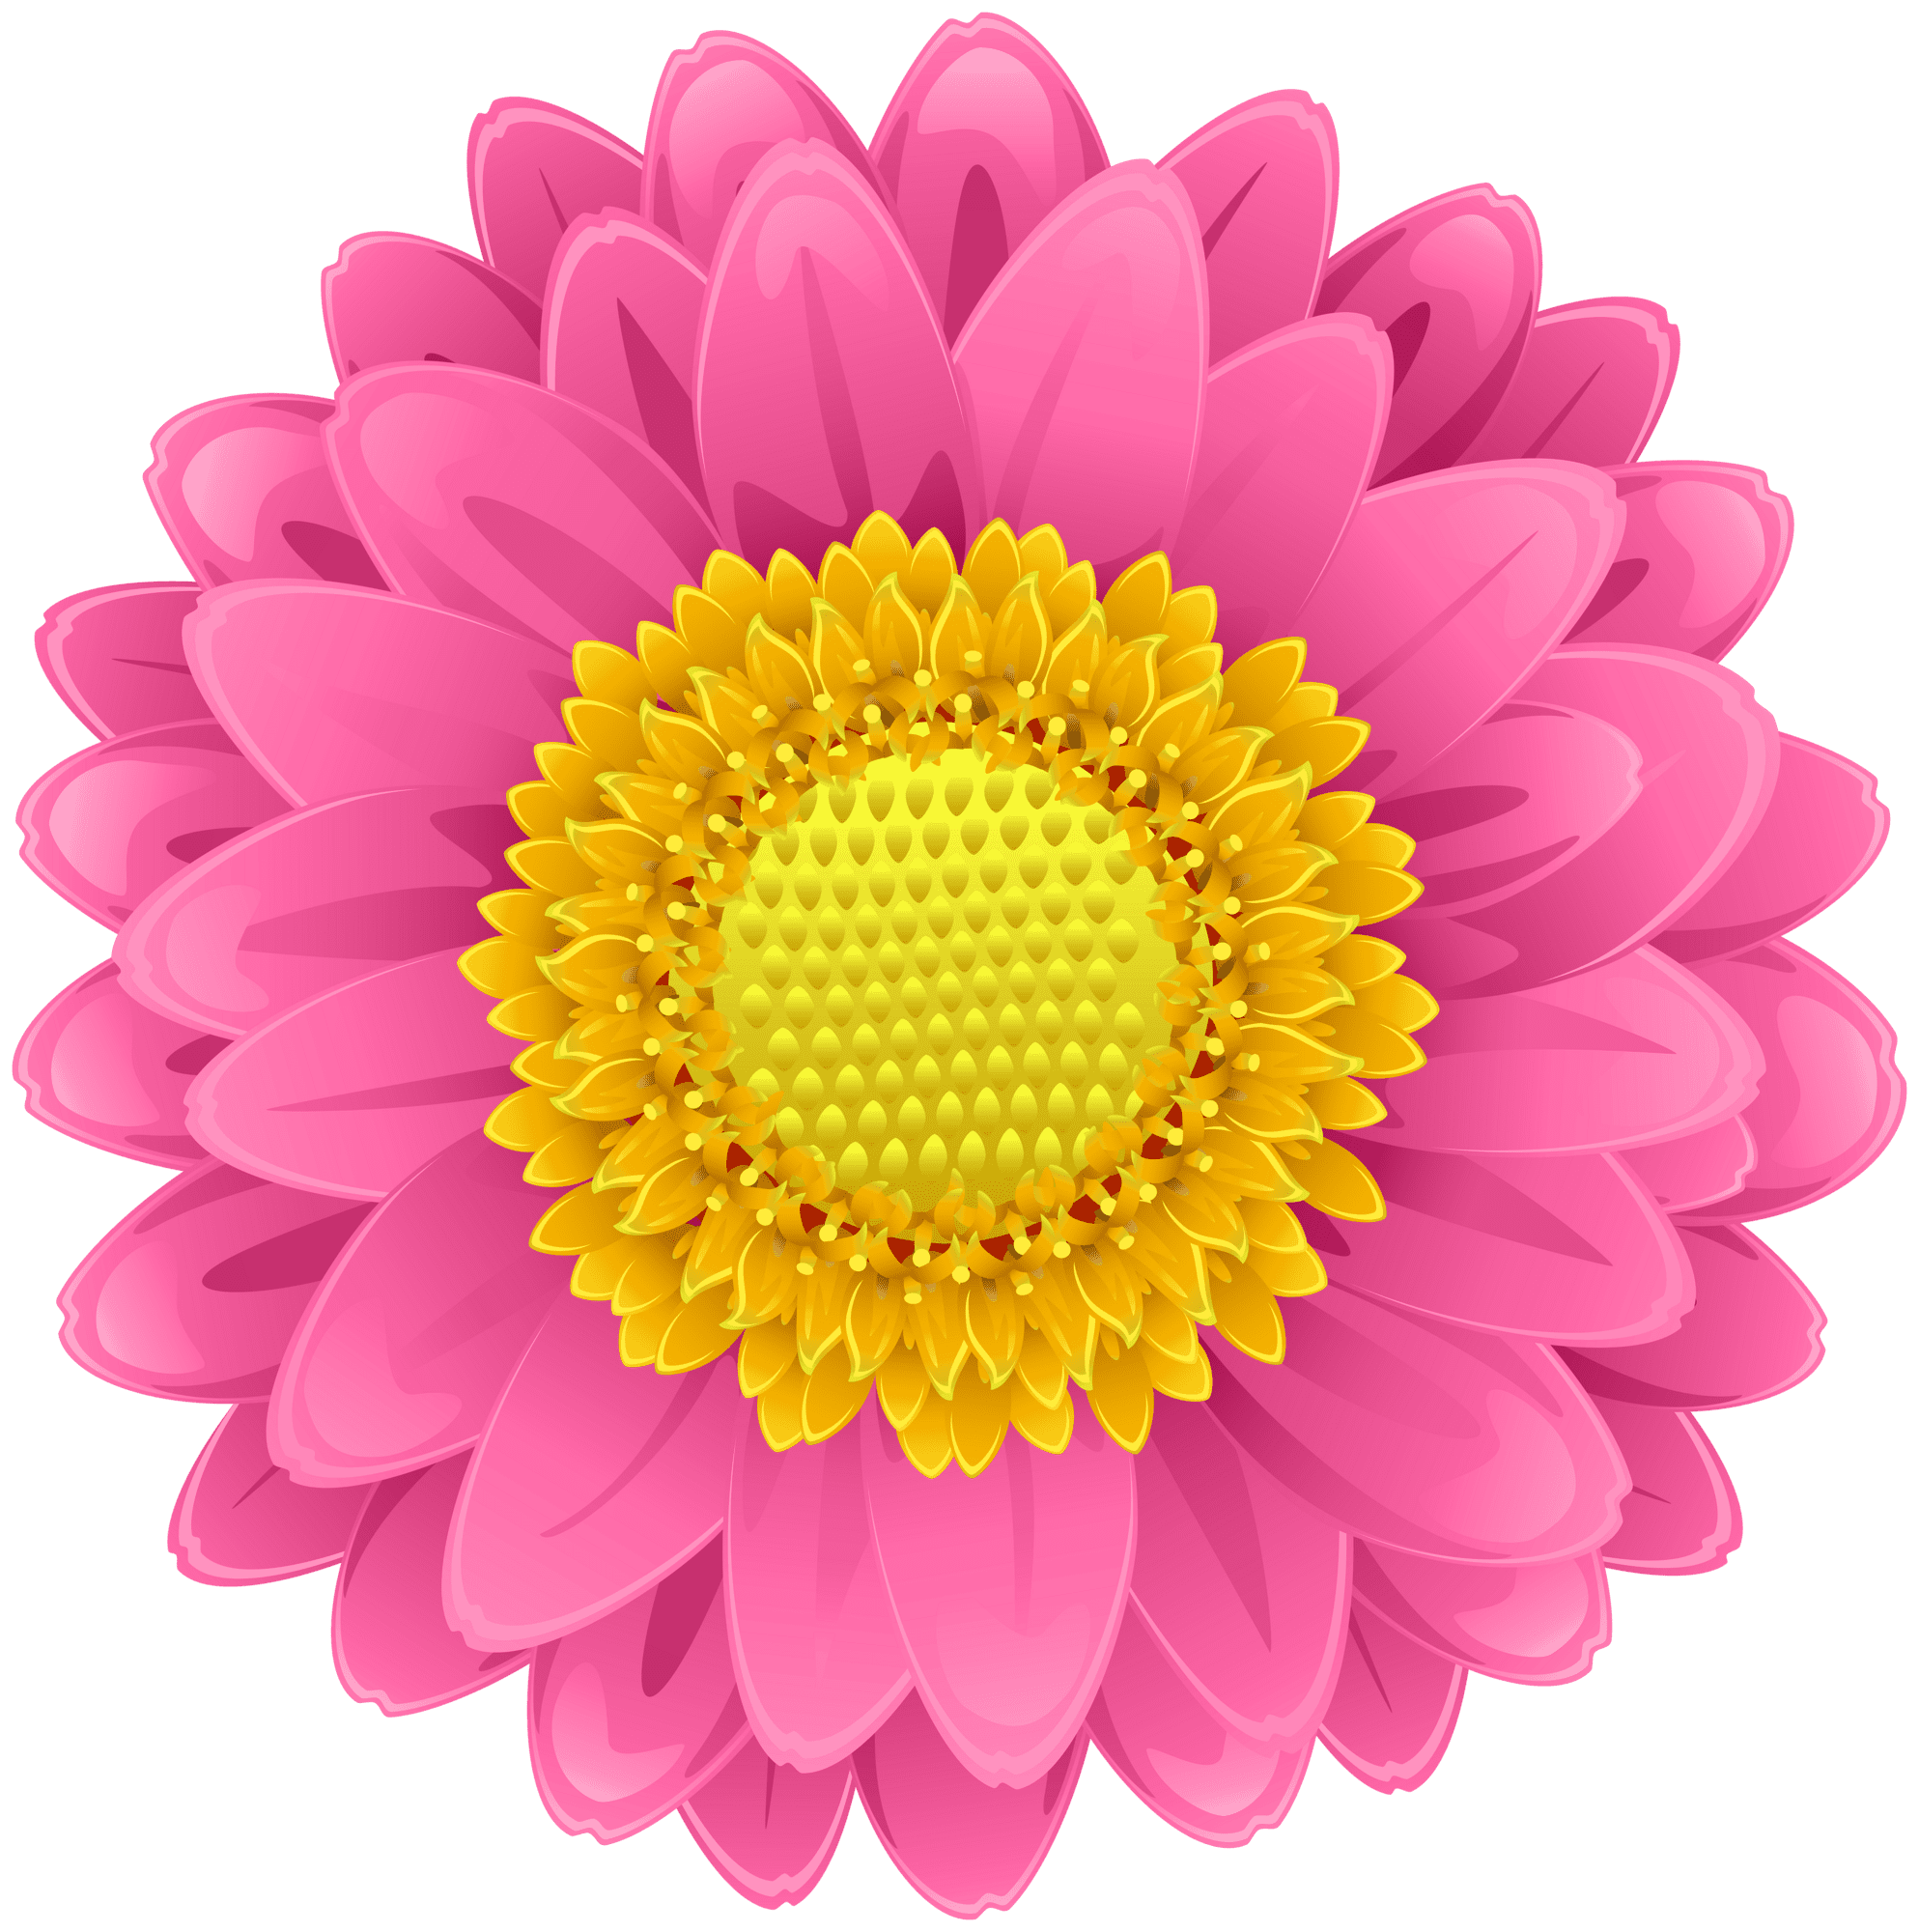 Pink flower clipart image 2